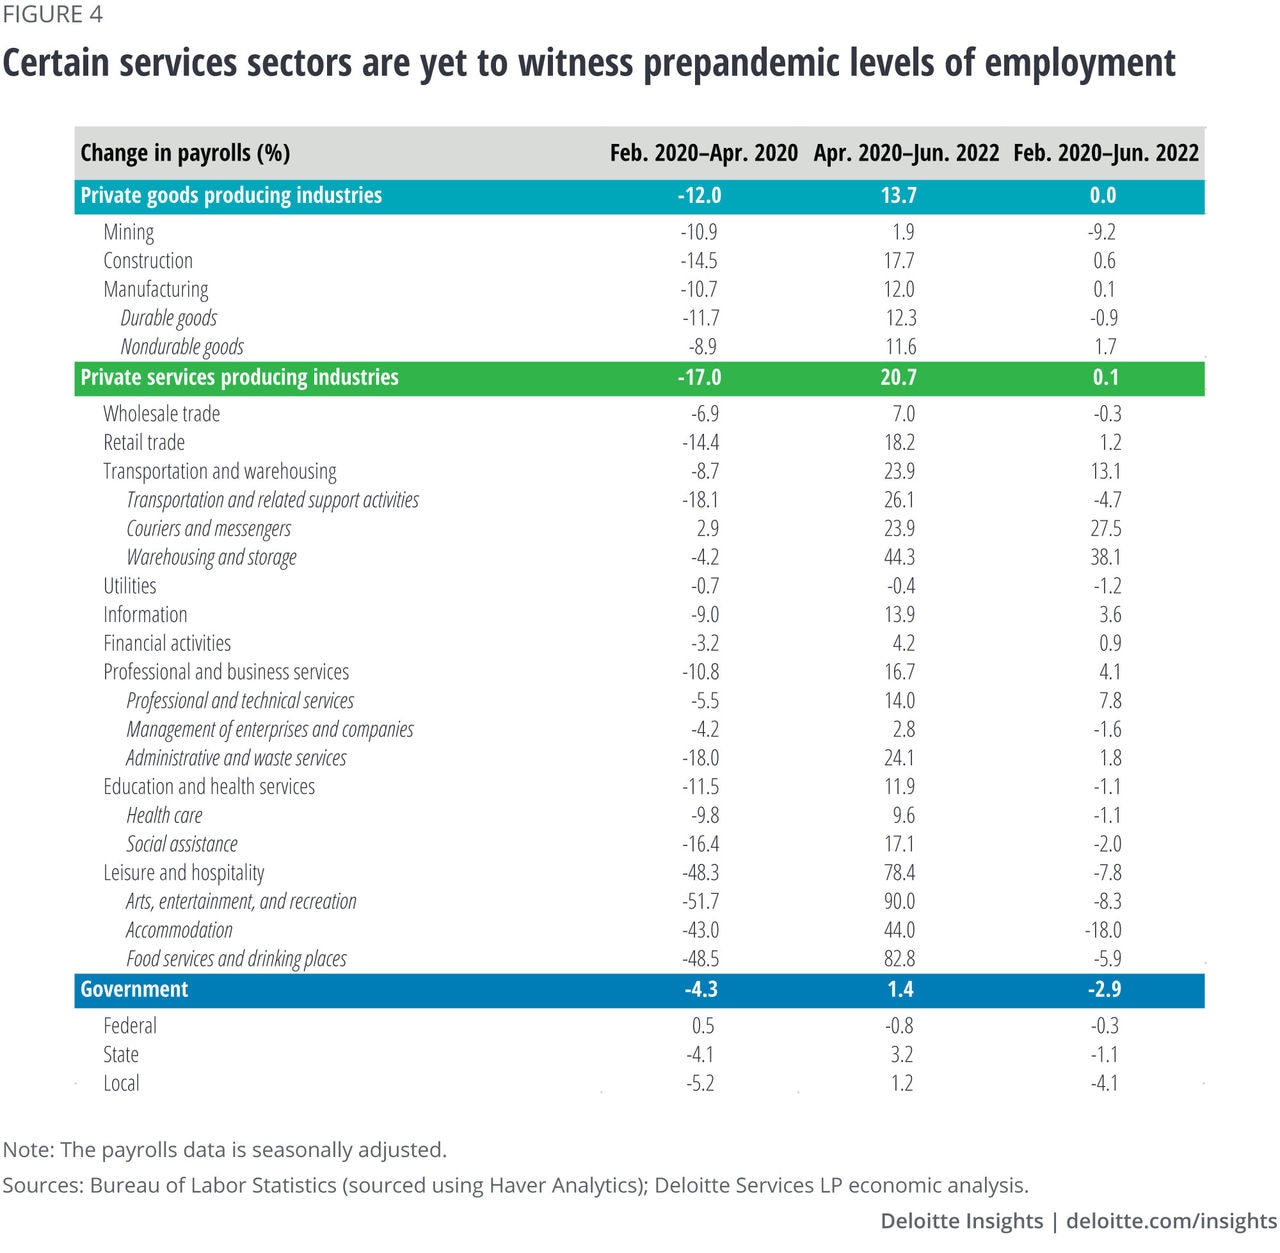 Figure 4. Certain services sectors are yet to witness prepandemic levels of employment